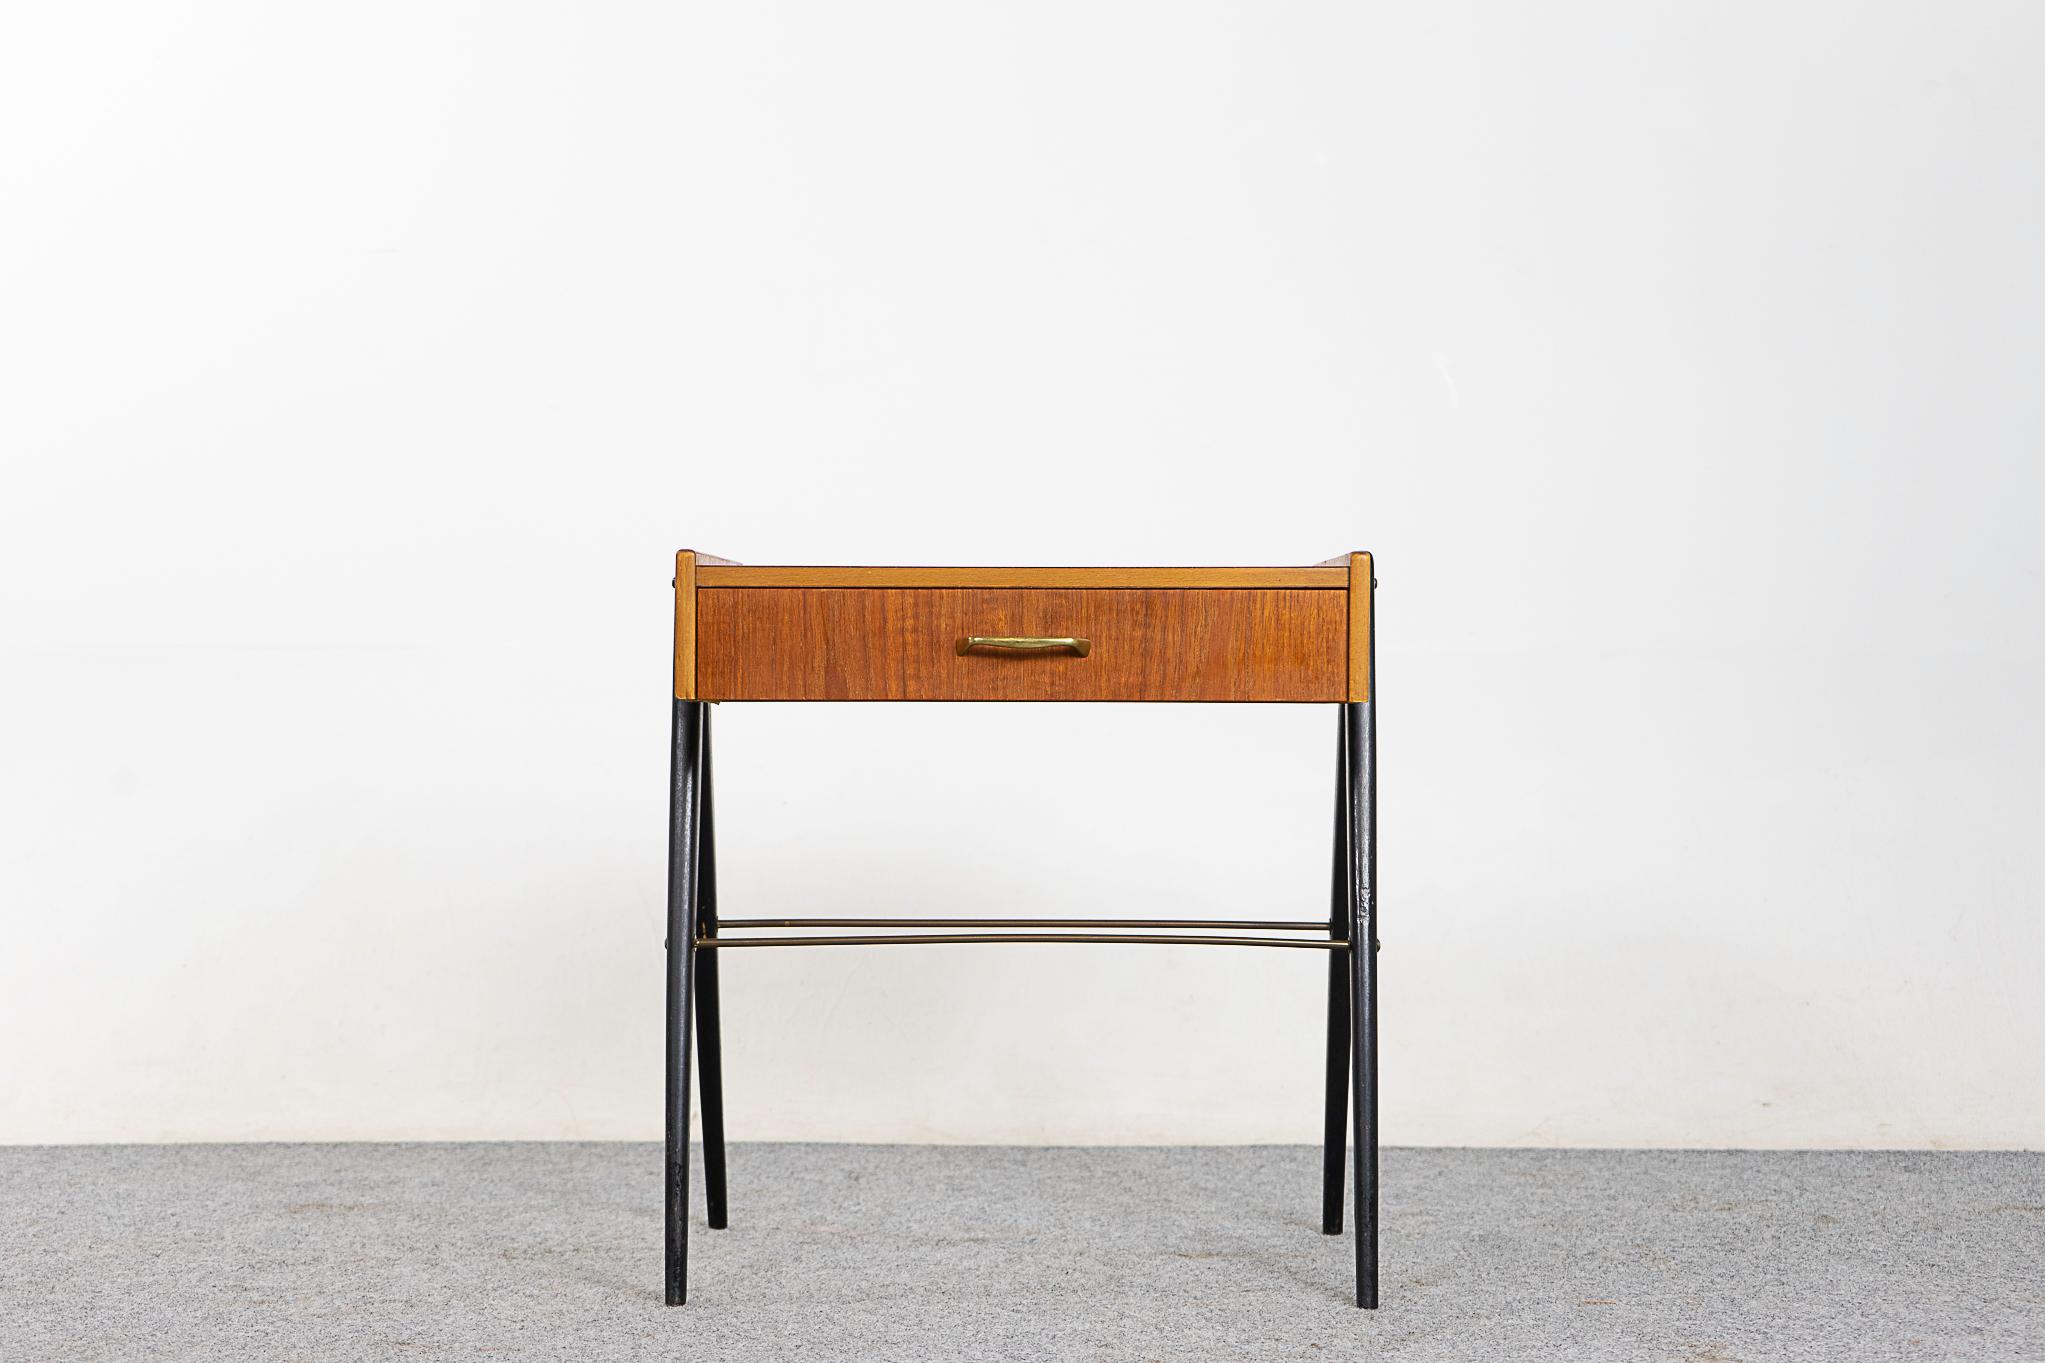 Teak midcentury bedside table, circa 1960s. Dovetailed drawer for your small items, beautifully veneered case rests on slender splayed black legs with contrasting metal supports.

Unrestored item, some very minor marks consistent with age.

Please